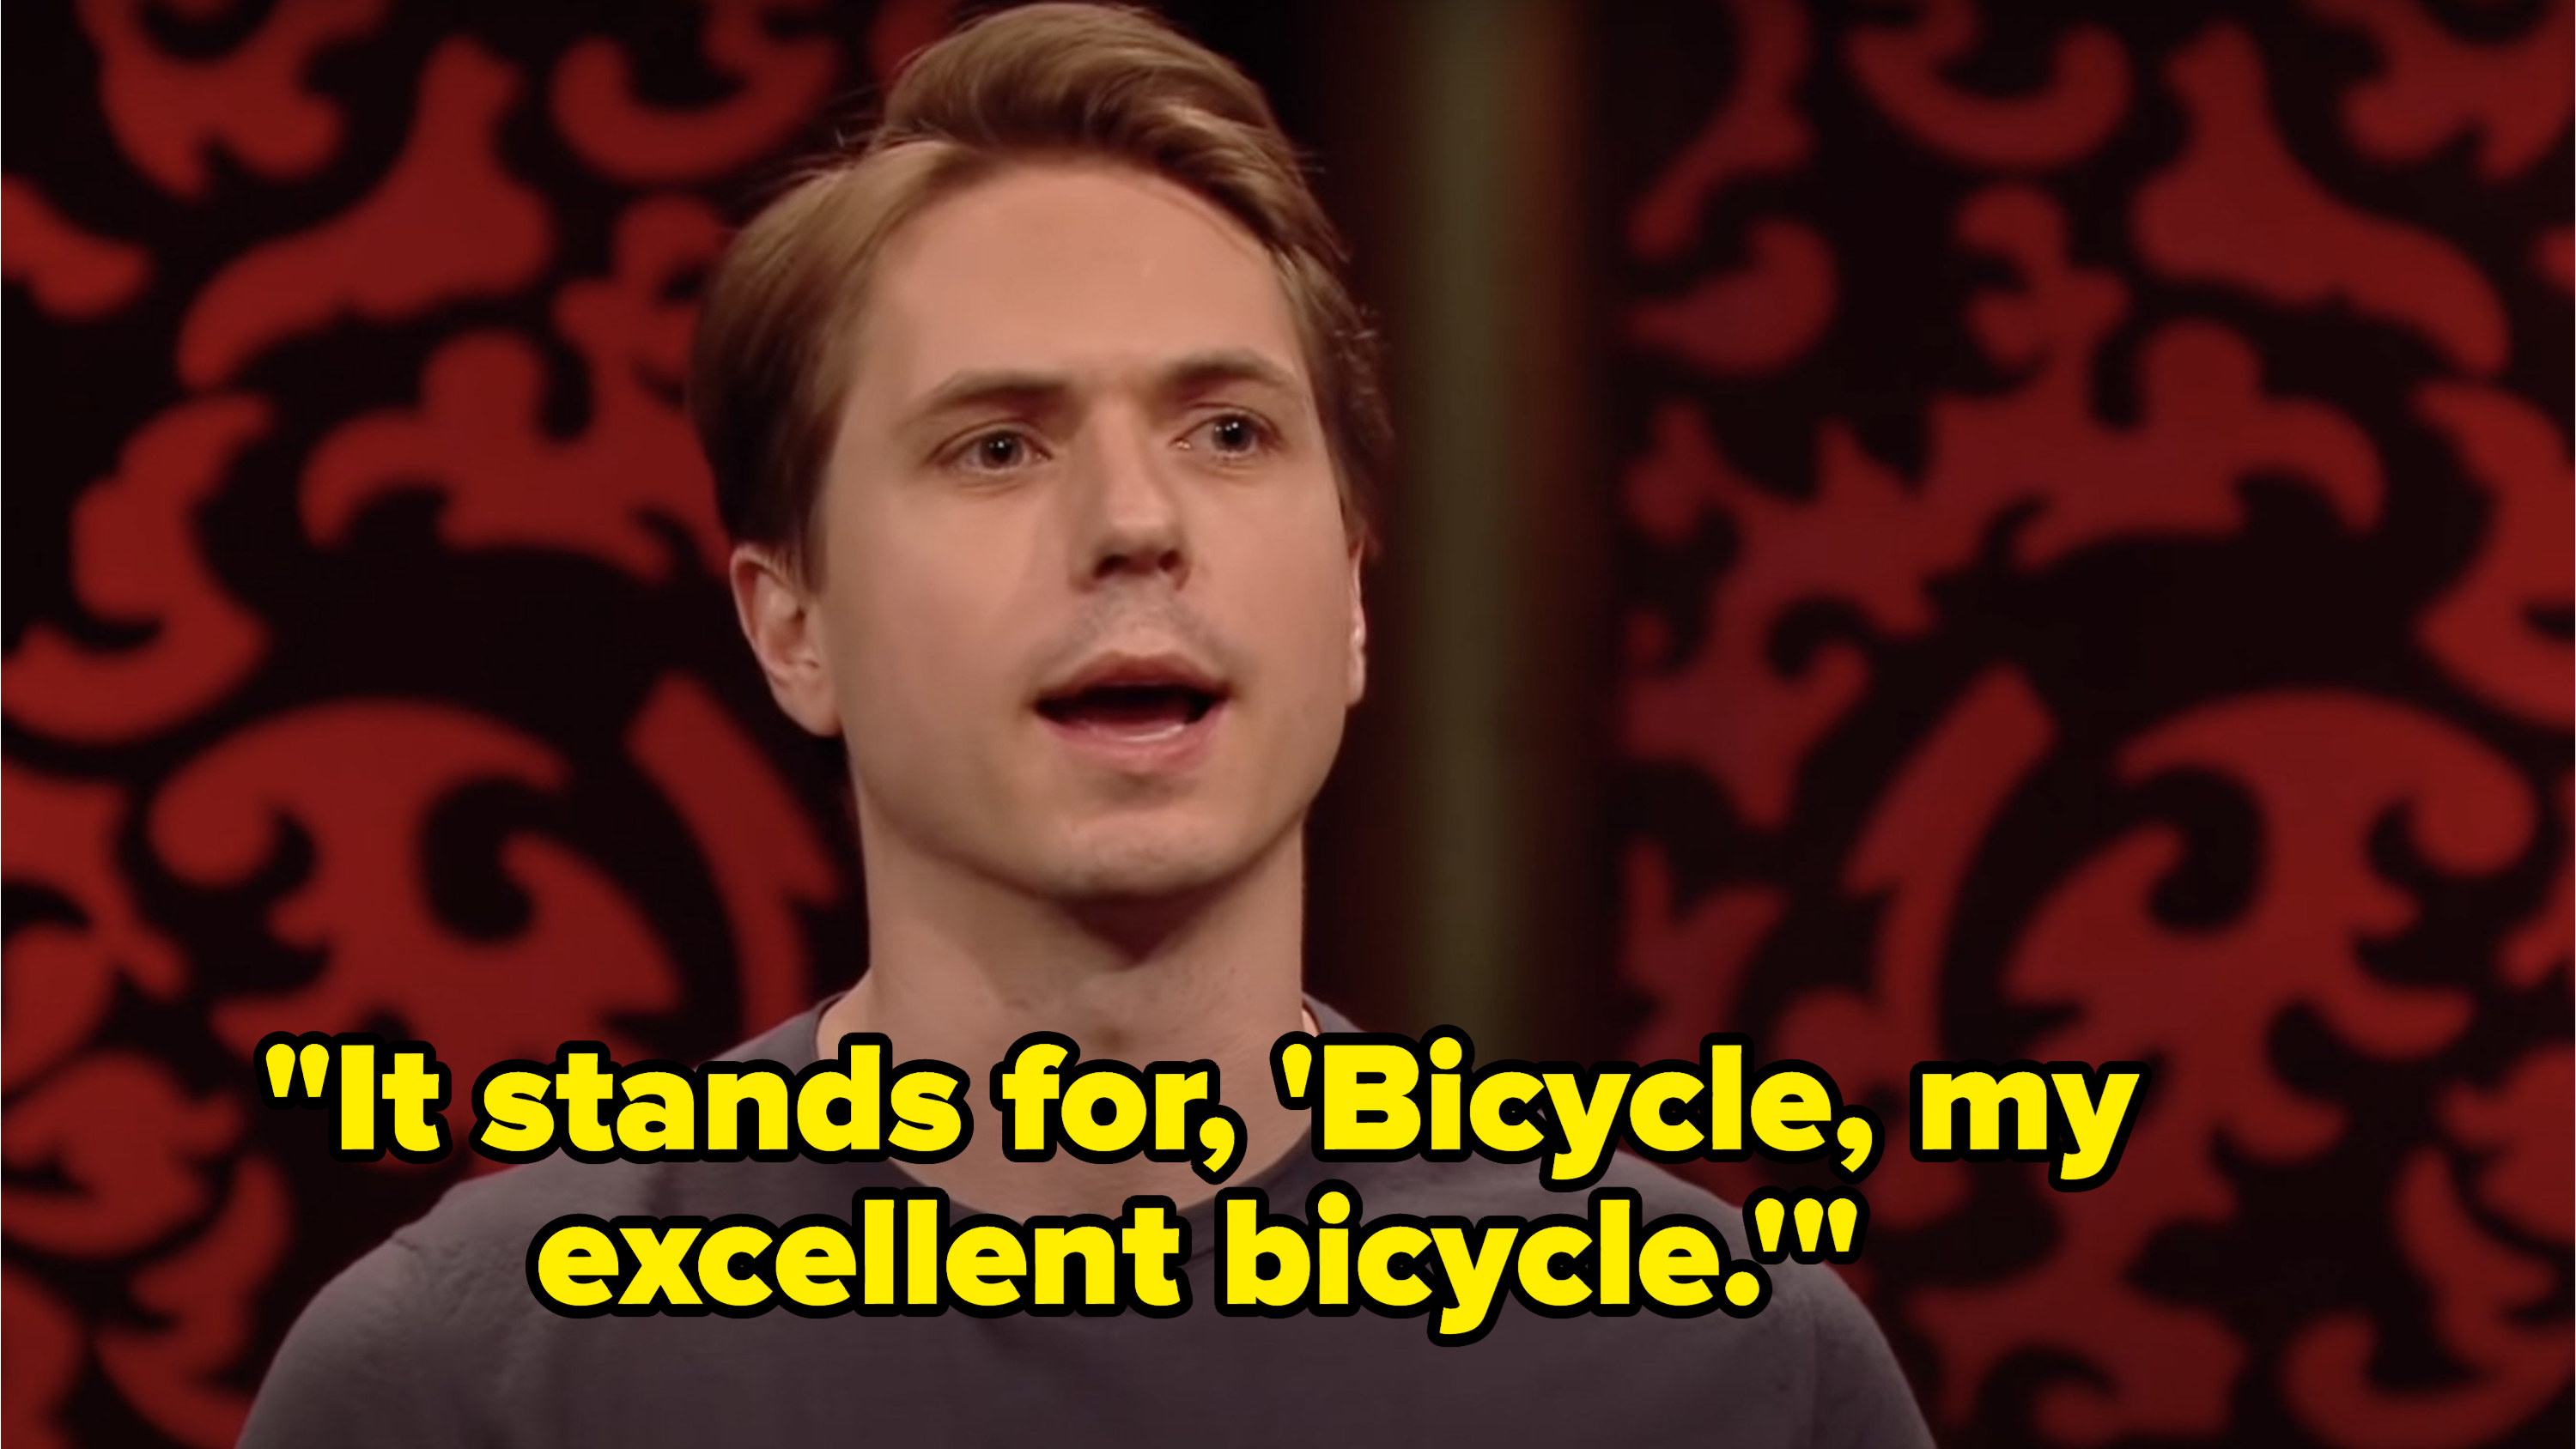 Joe Thomas says, It stands for, Bicycle, my excellent bicycle